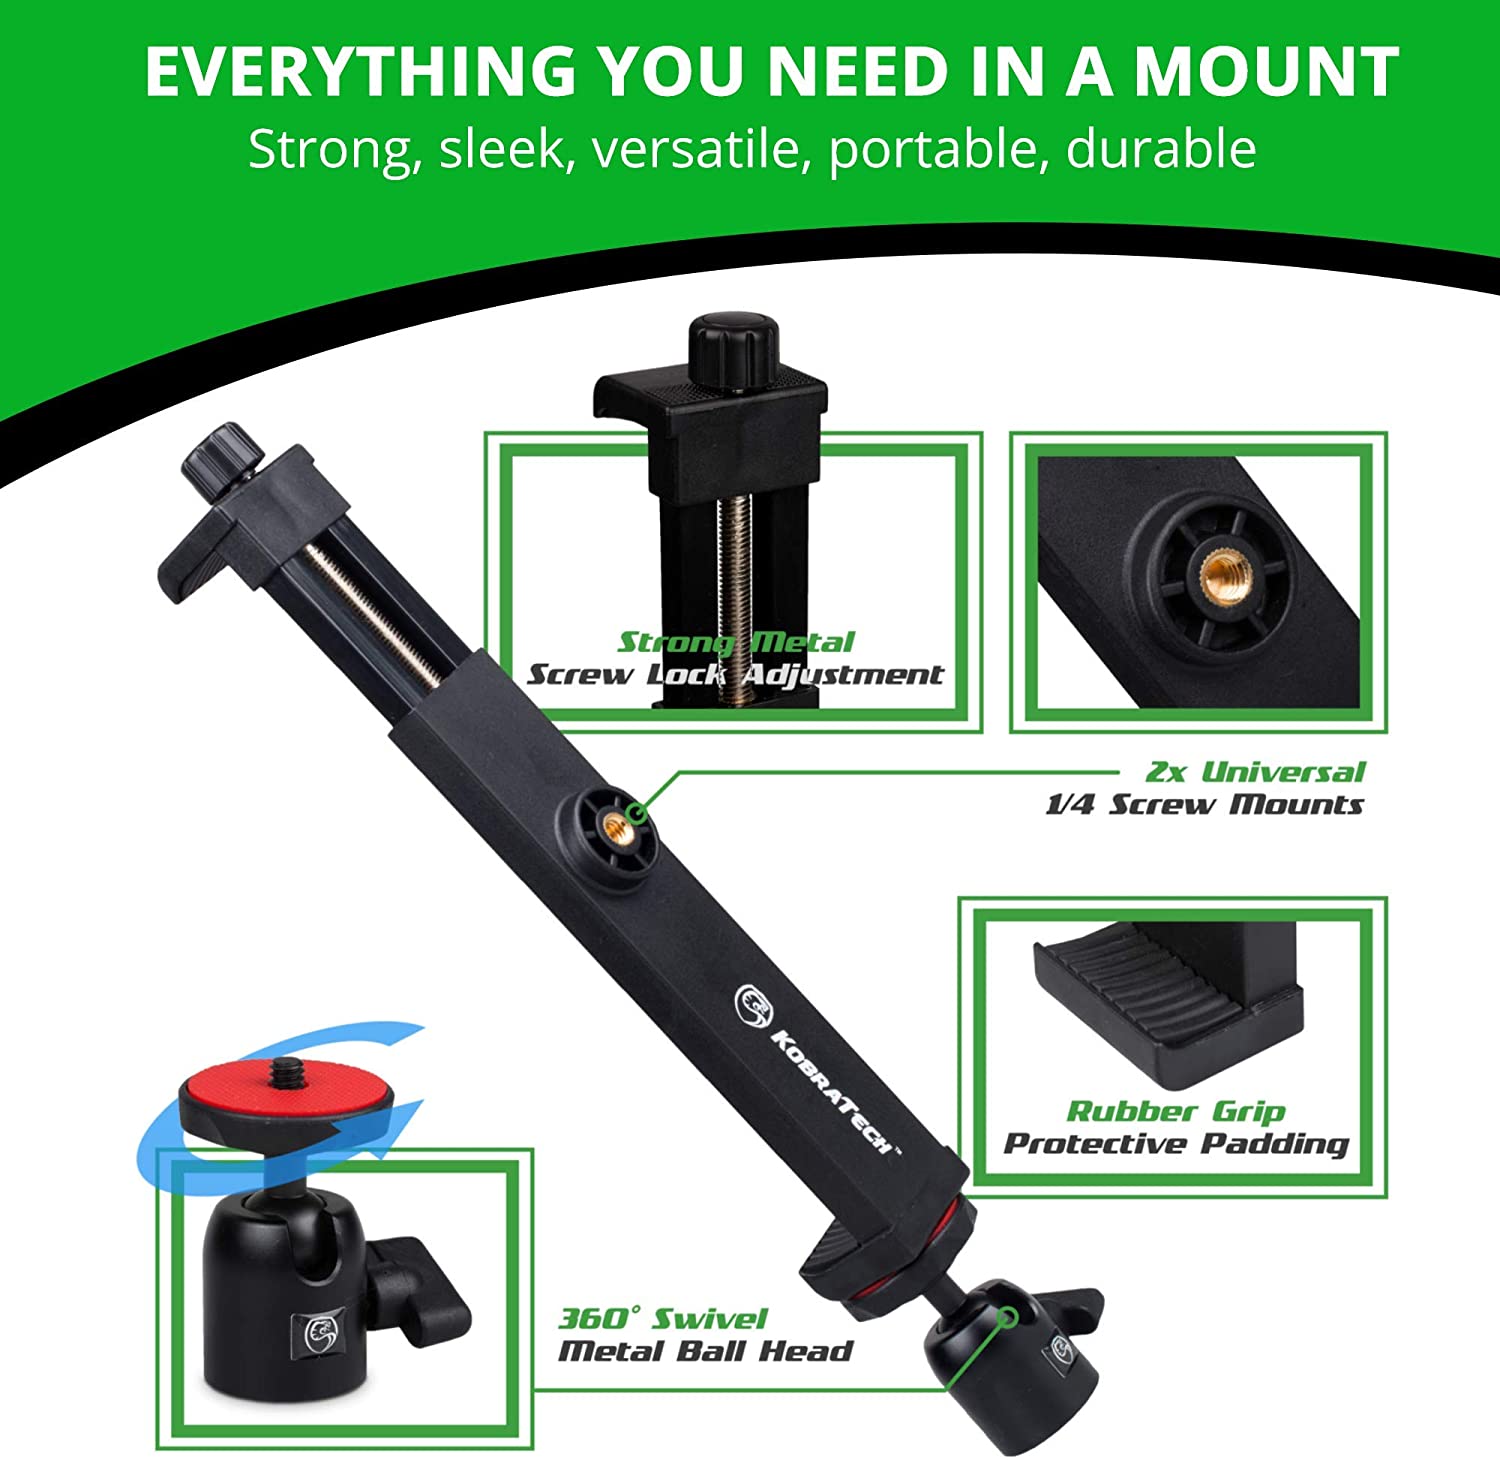 KobraTech iPad Tripod Mount - TabMount 360 - iPad Mount for Tripods with Ball Head & Bluetooth Remote Shutter - e4cents